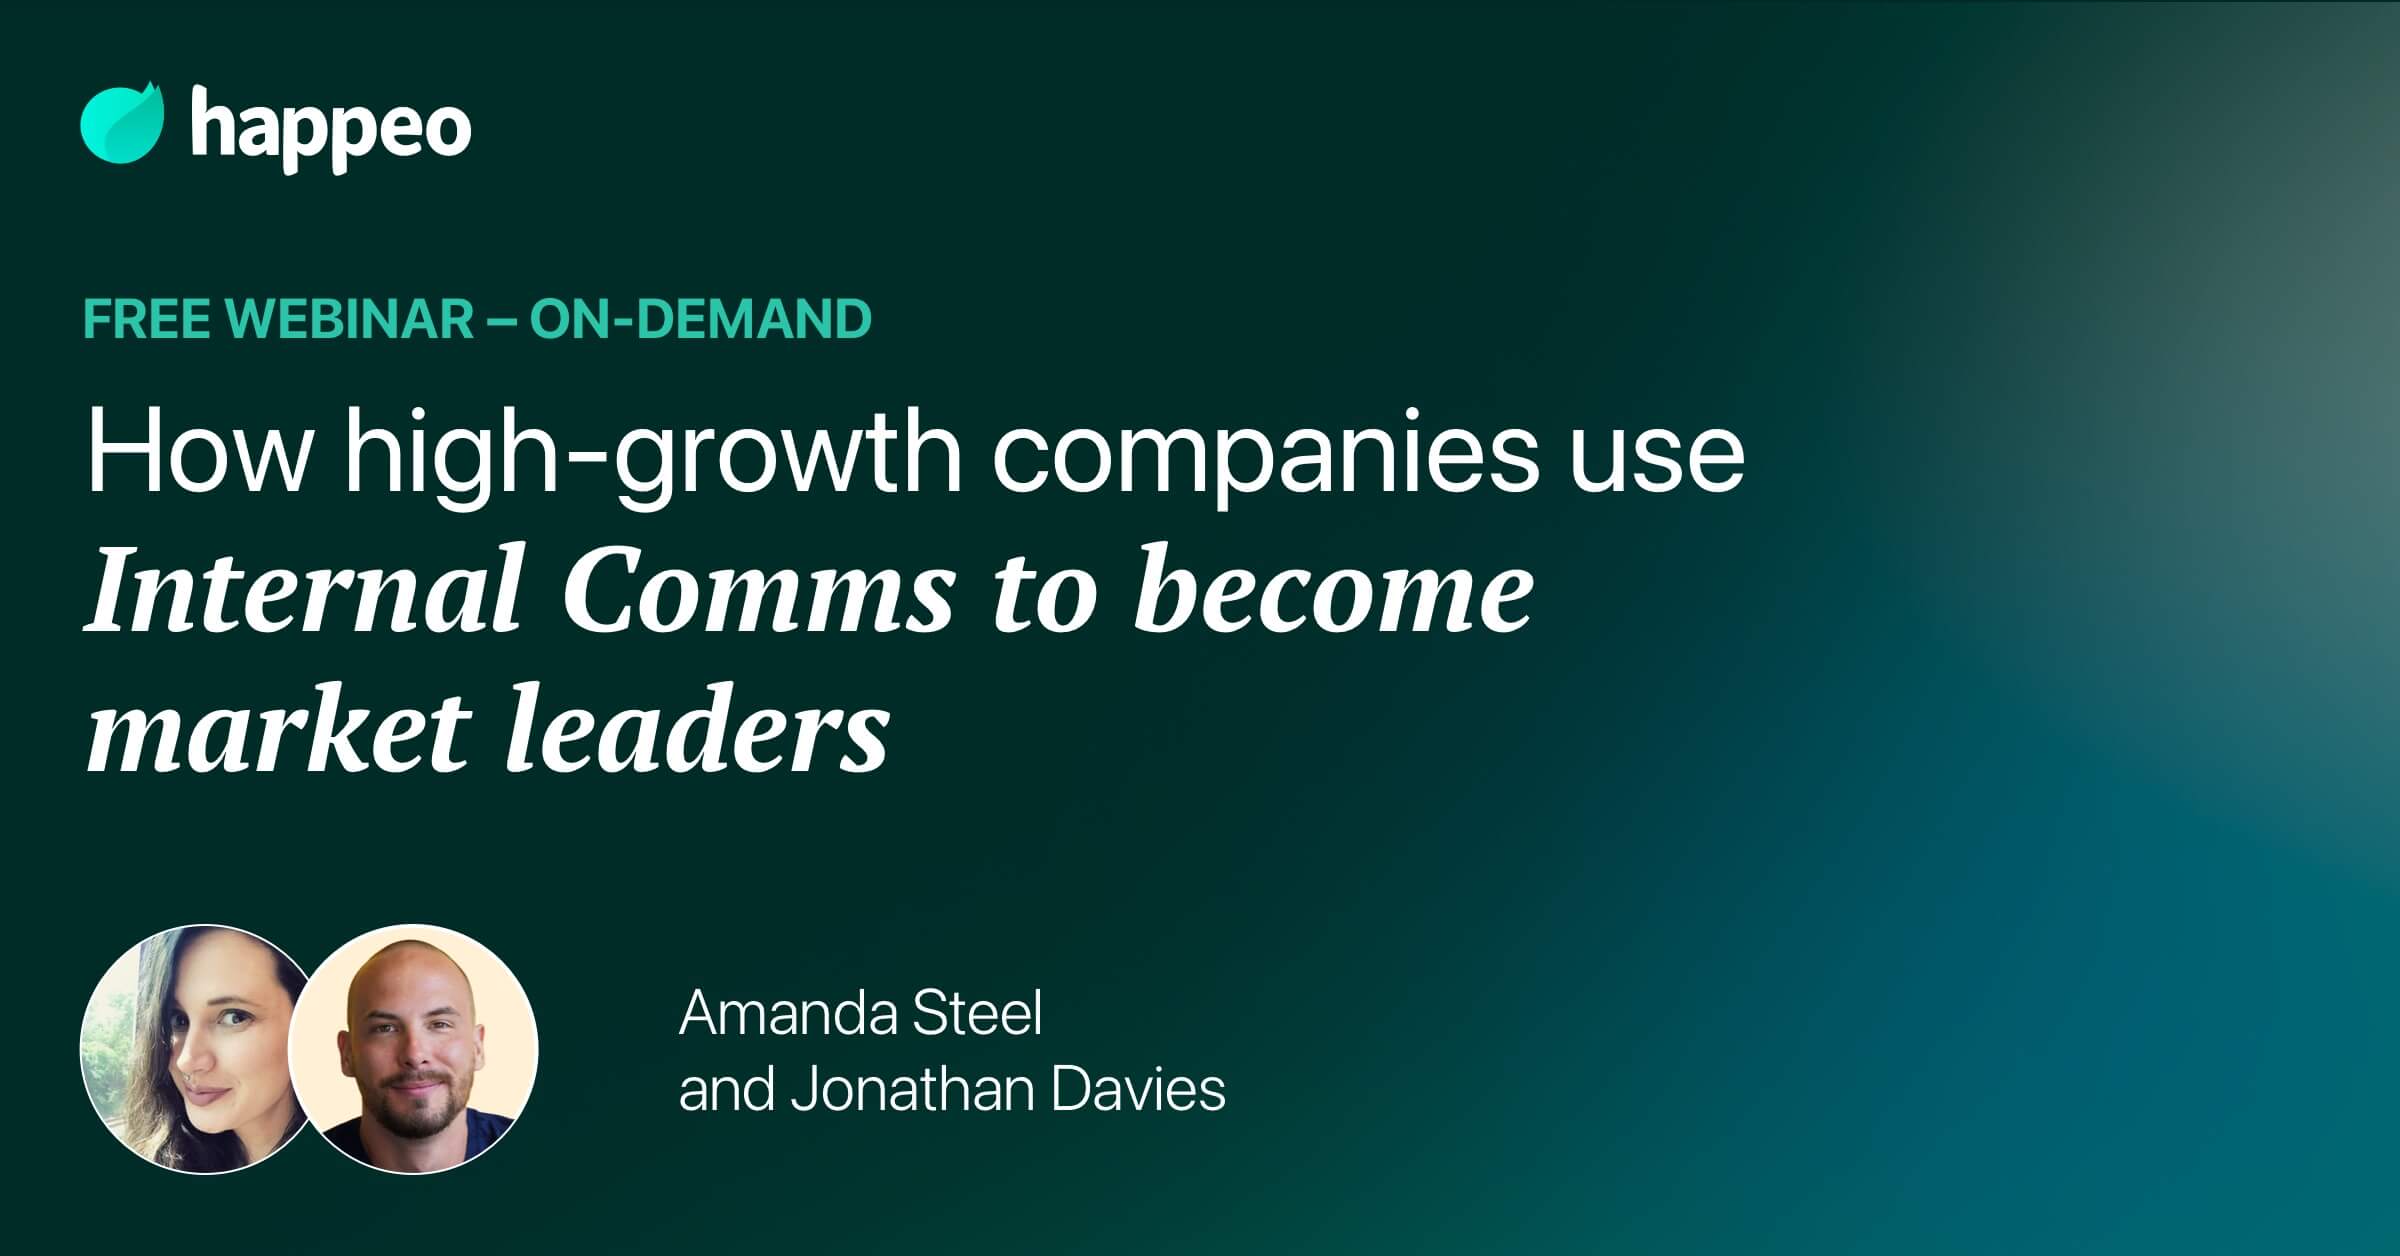 How high growth companies use Internal Comms to become market leaders